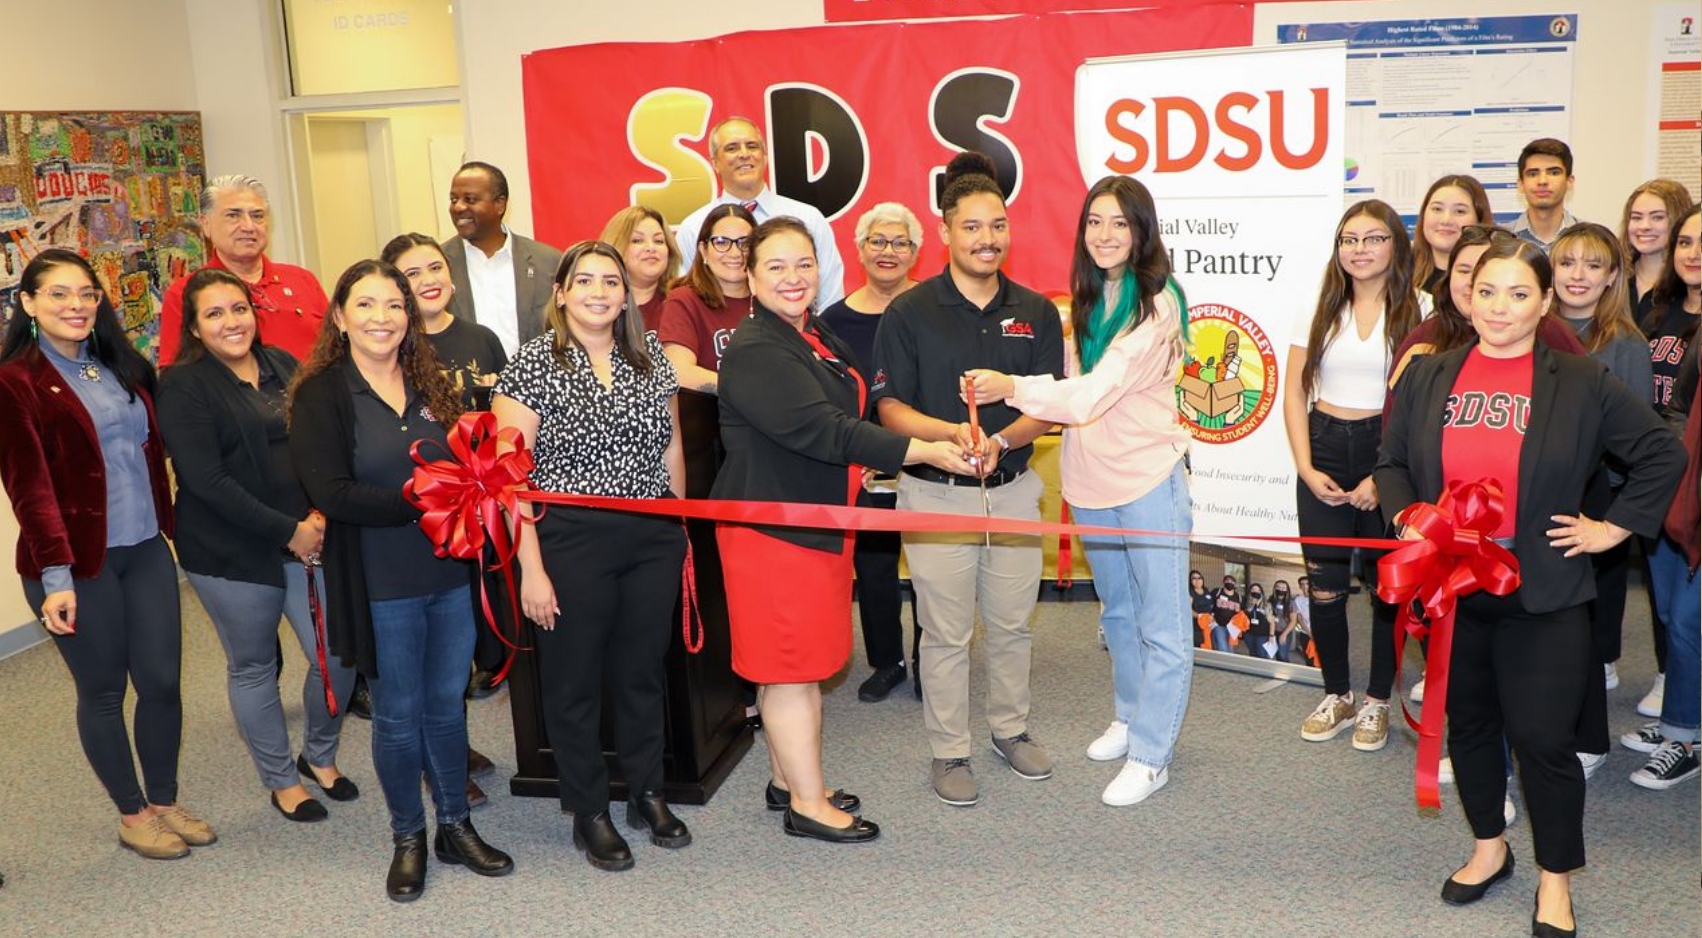 SDSU IV's new food pantry provides students with weekly bags of groceries as well as the opportunity to shop for specific items.